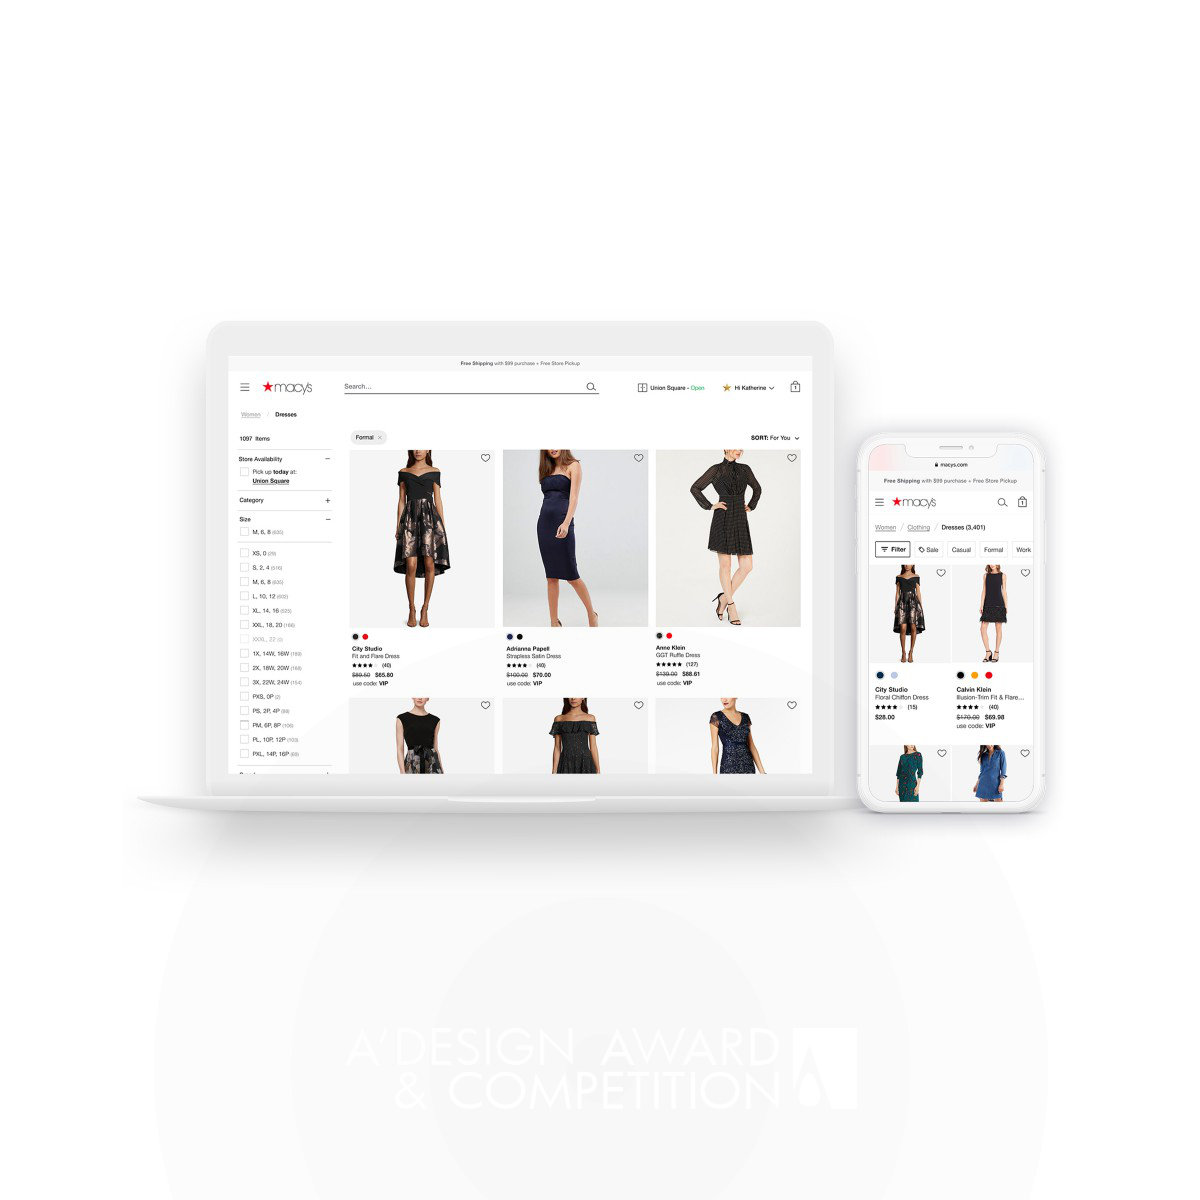 Macys Website Redesign by Willy Lai